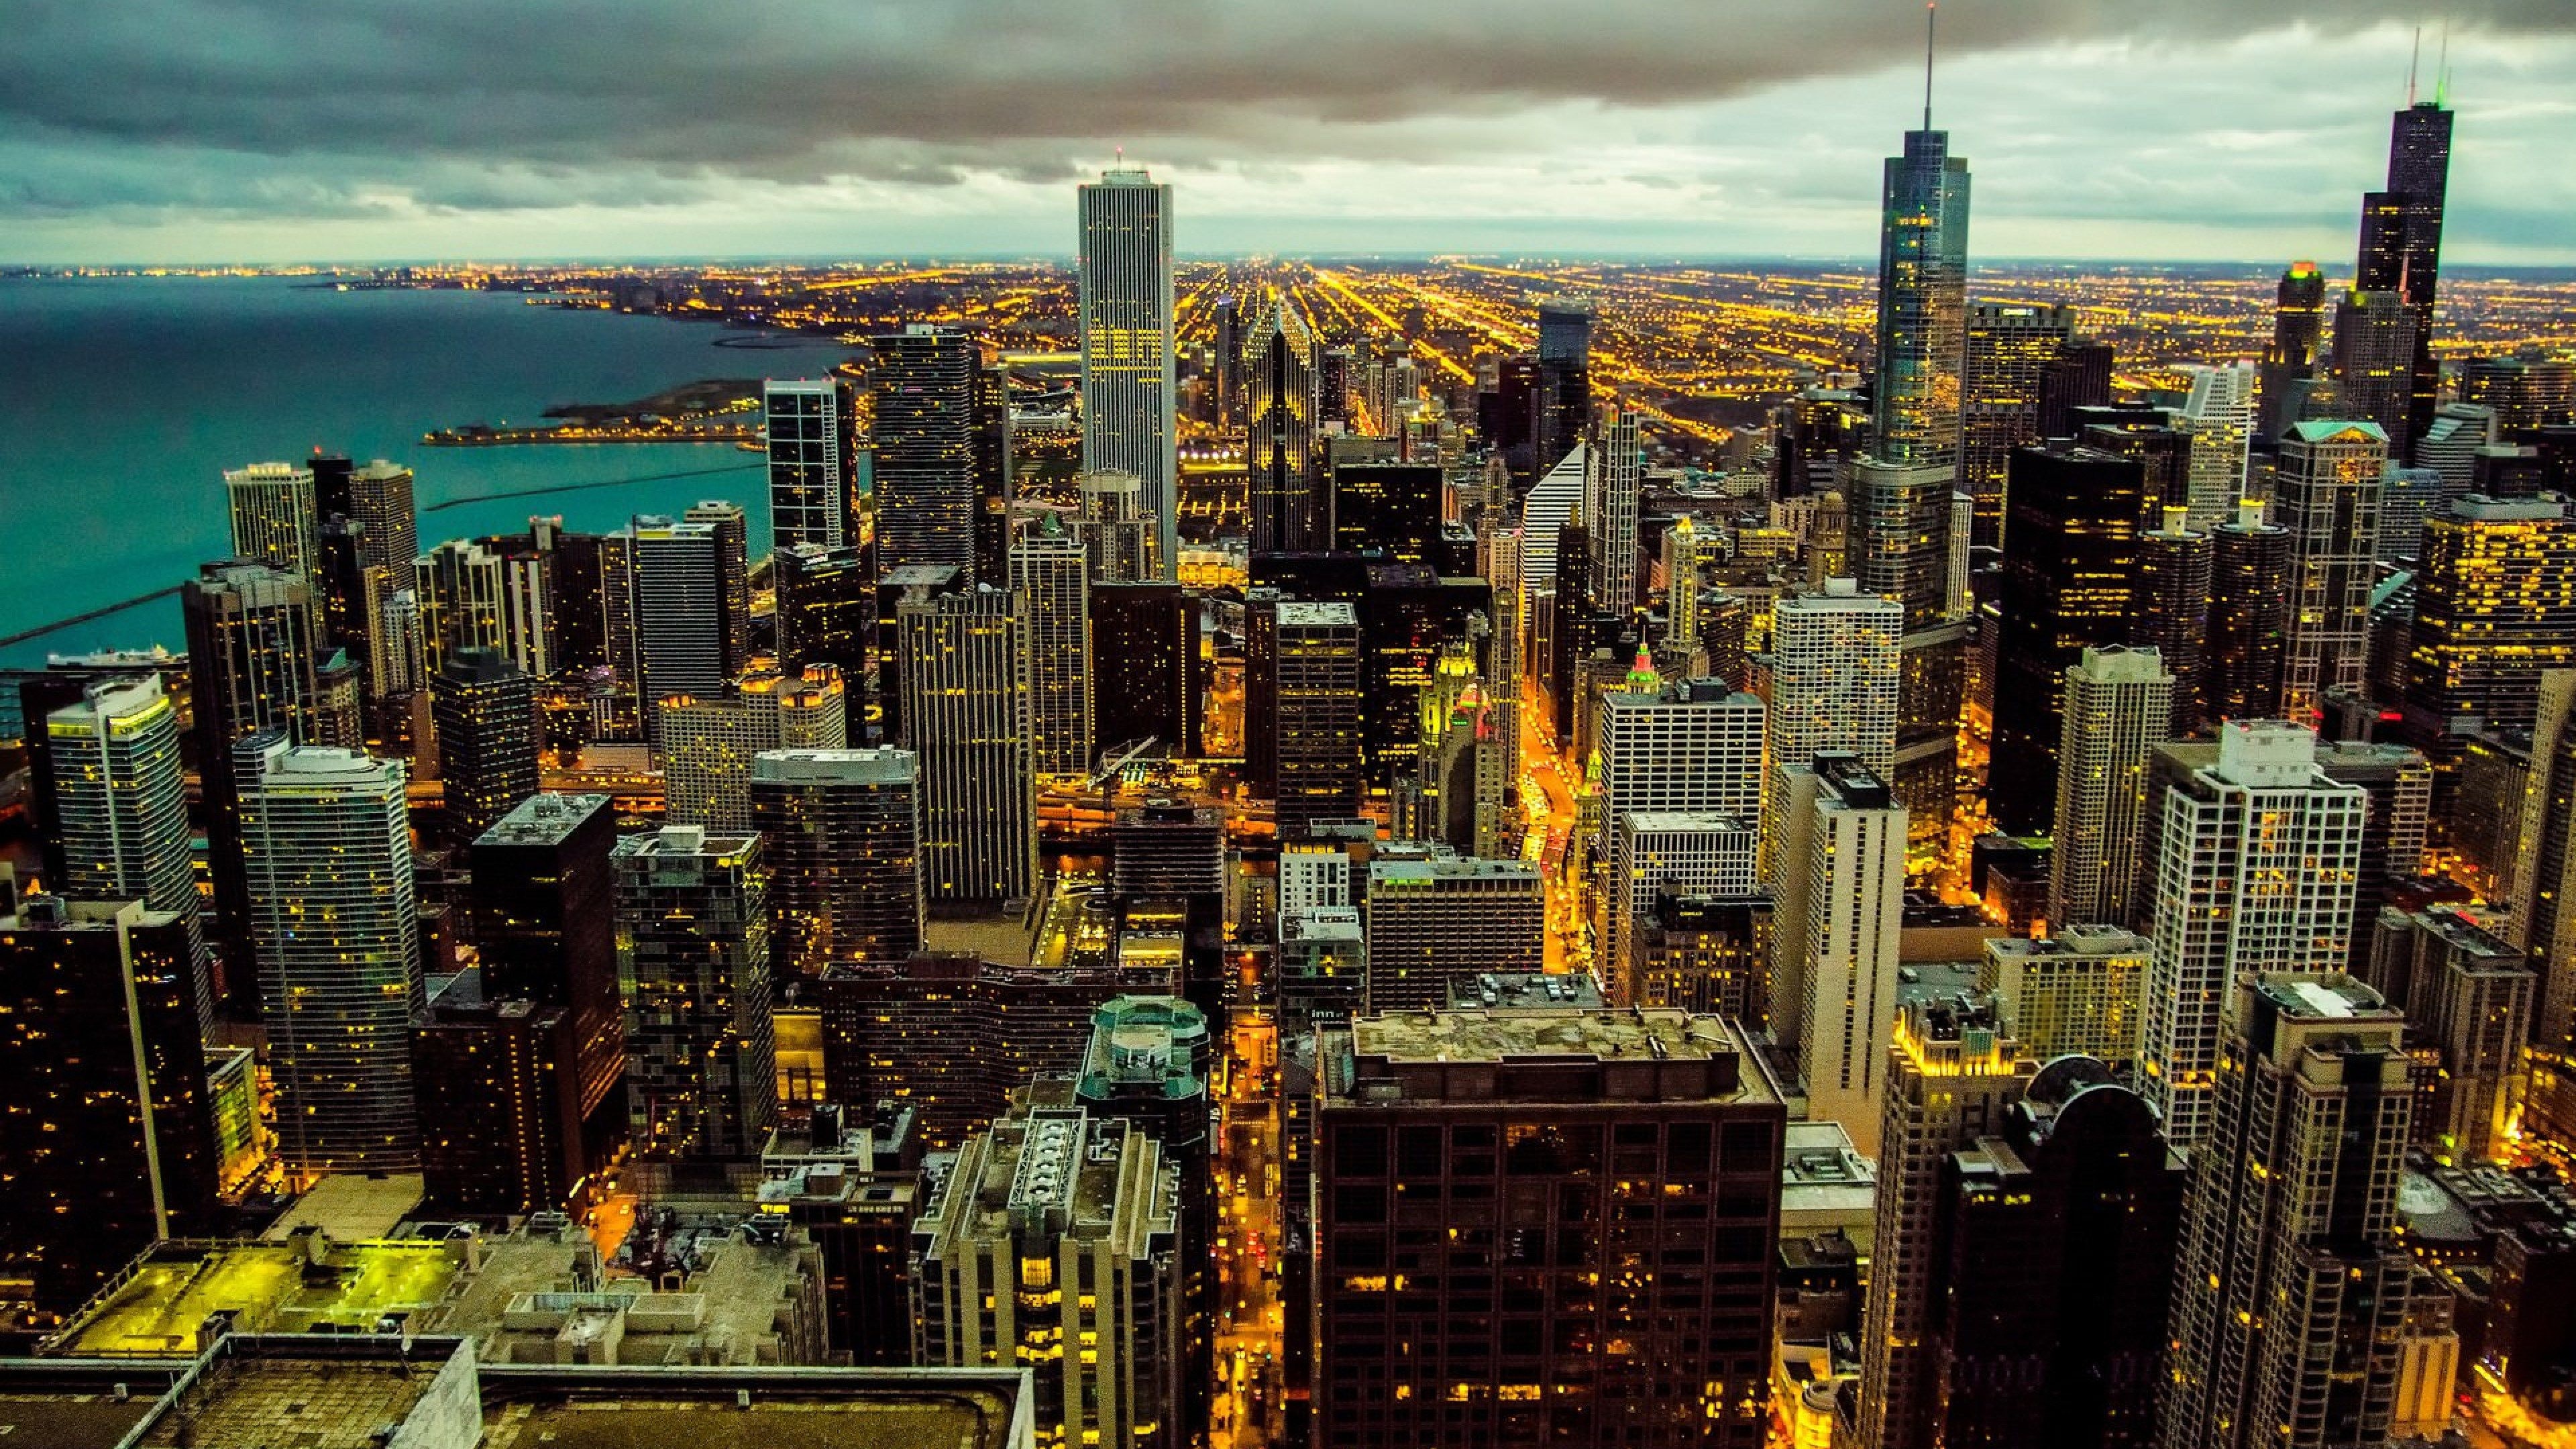 Chicago: Was incorporated as a city in 1837, Aon Center, Monumentality. 3840x2160 4K Background.